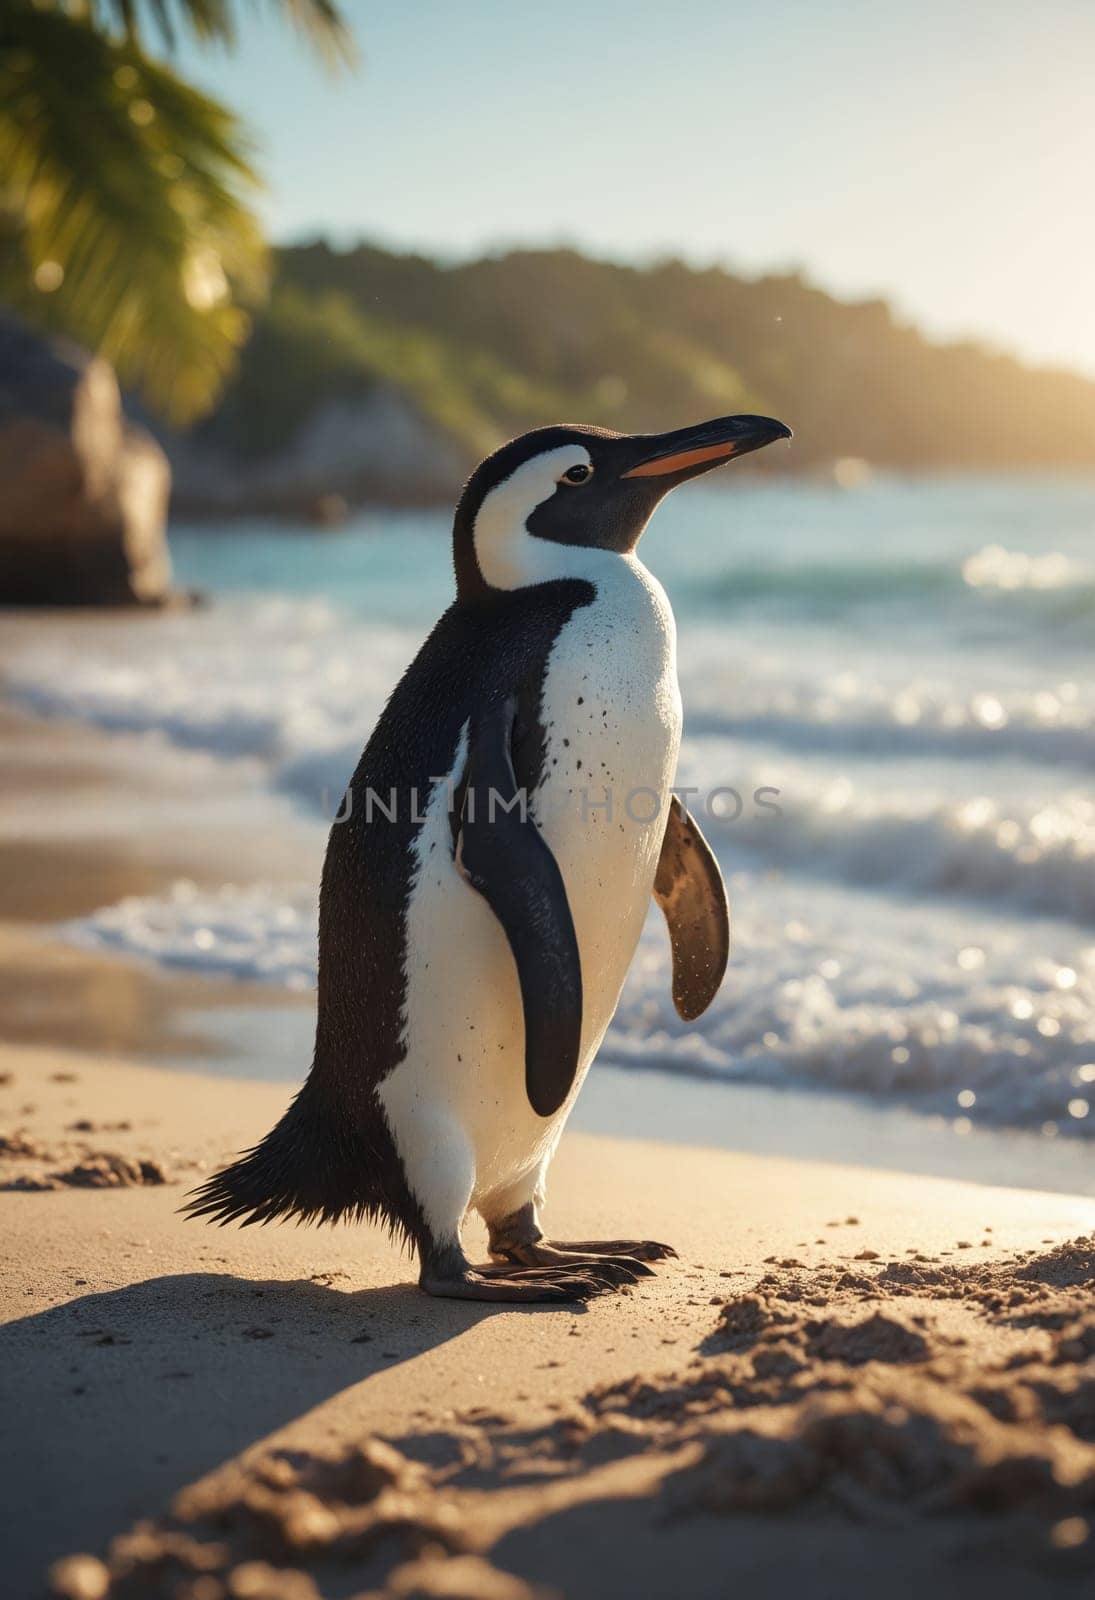 Tropical Surprise: A Penguin Exploring the Sandy Beach by Andre1ns